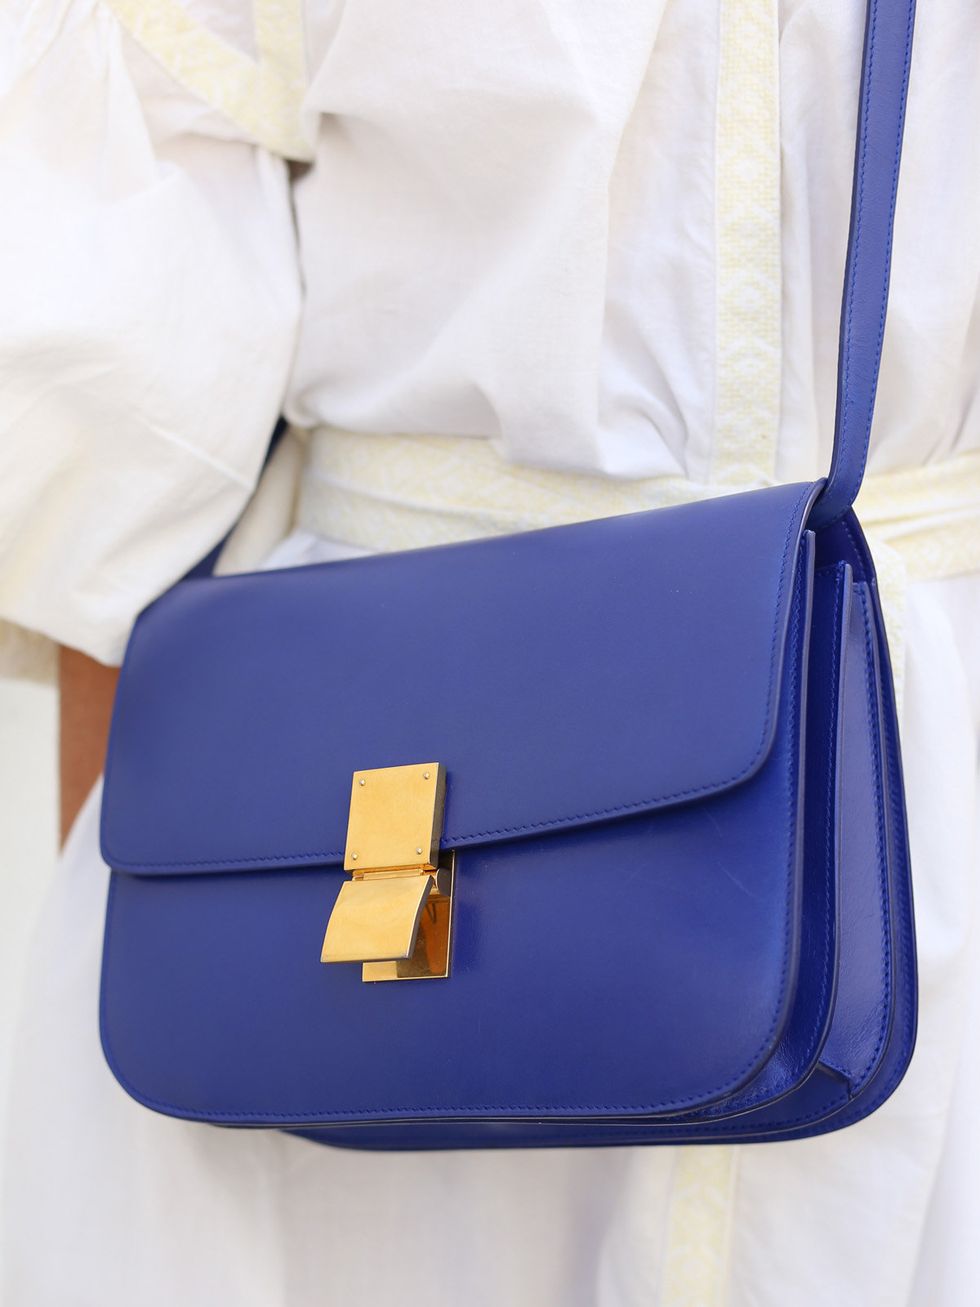 Bag, Cobalt blue, Blue, White, Handbag, Electric blue, Yellow, Fashion accessory, Leather, Material property, 